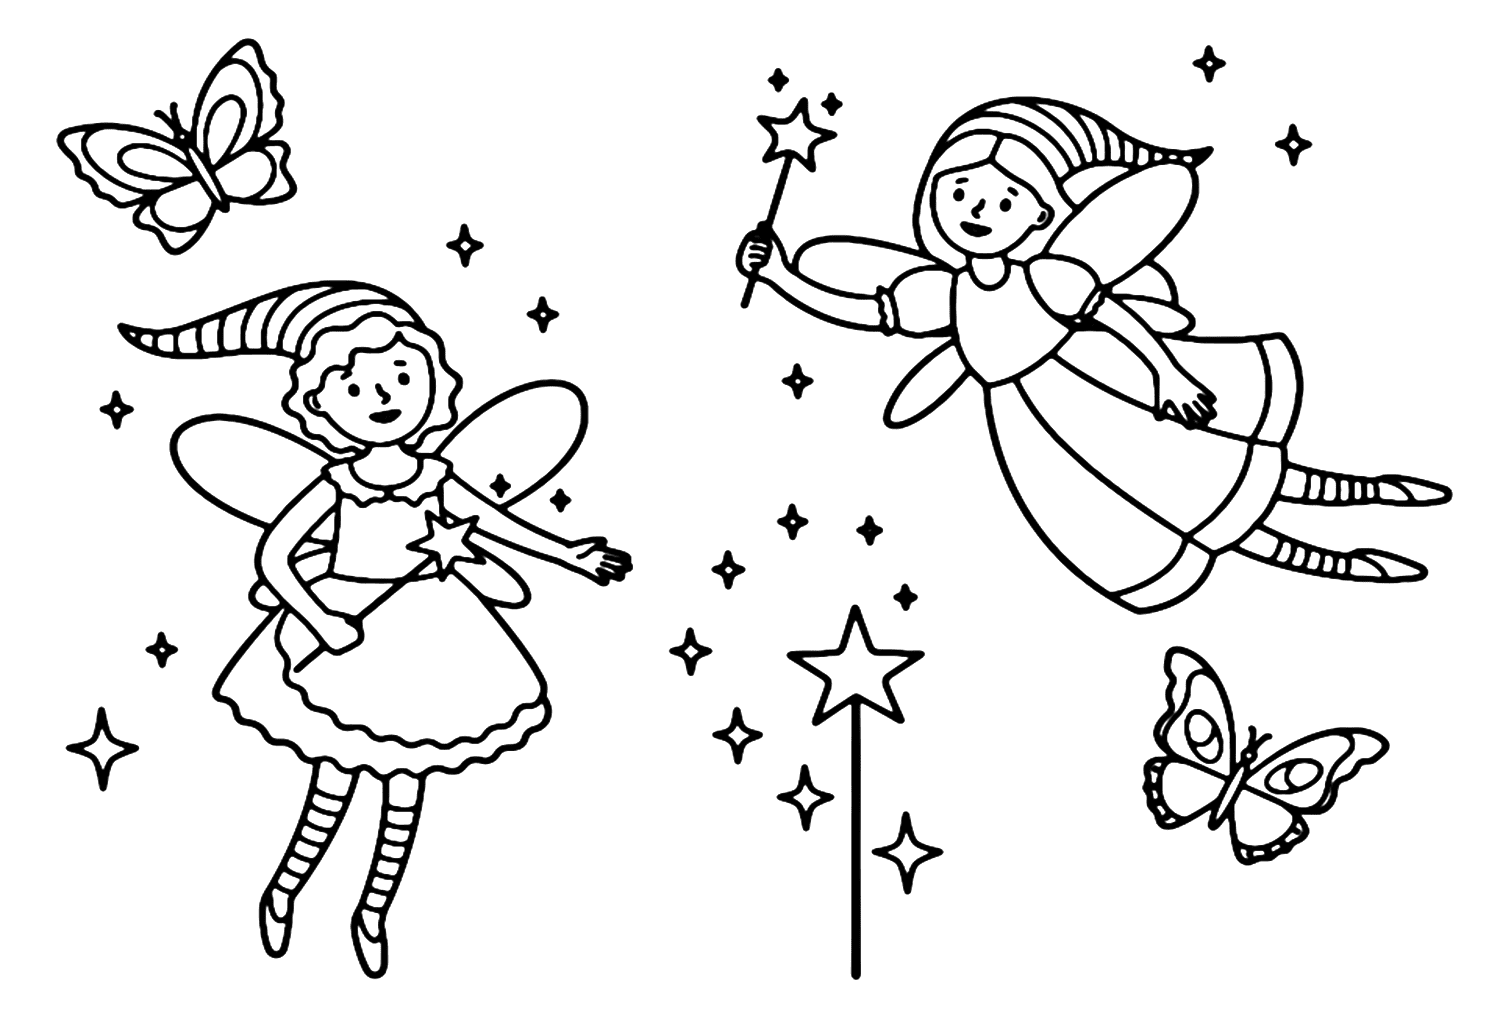 Fairy Coloring Page Printable Free Coloring Page